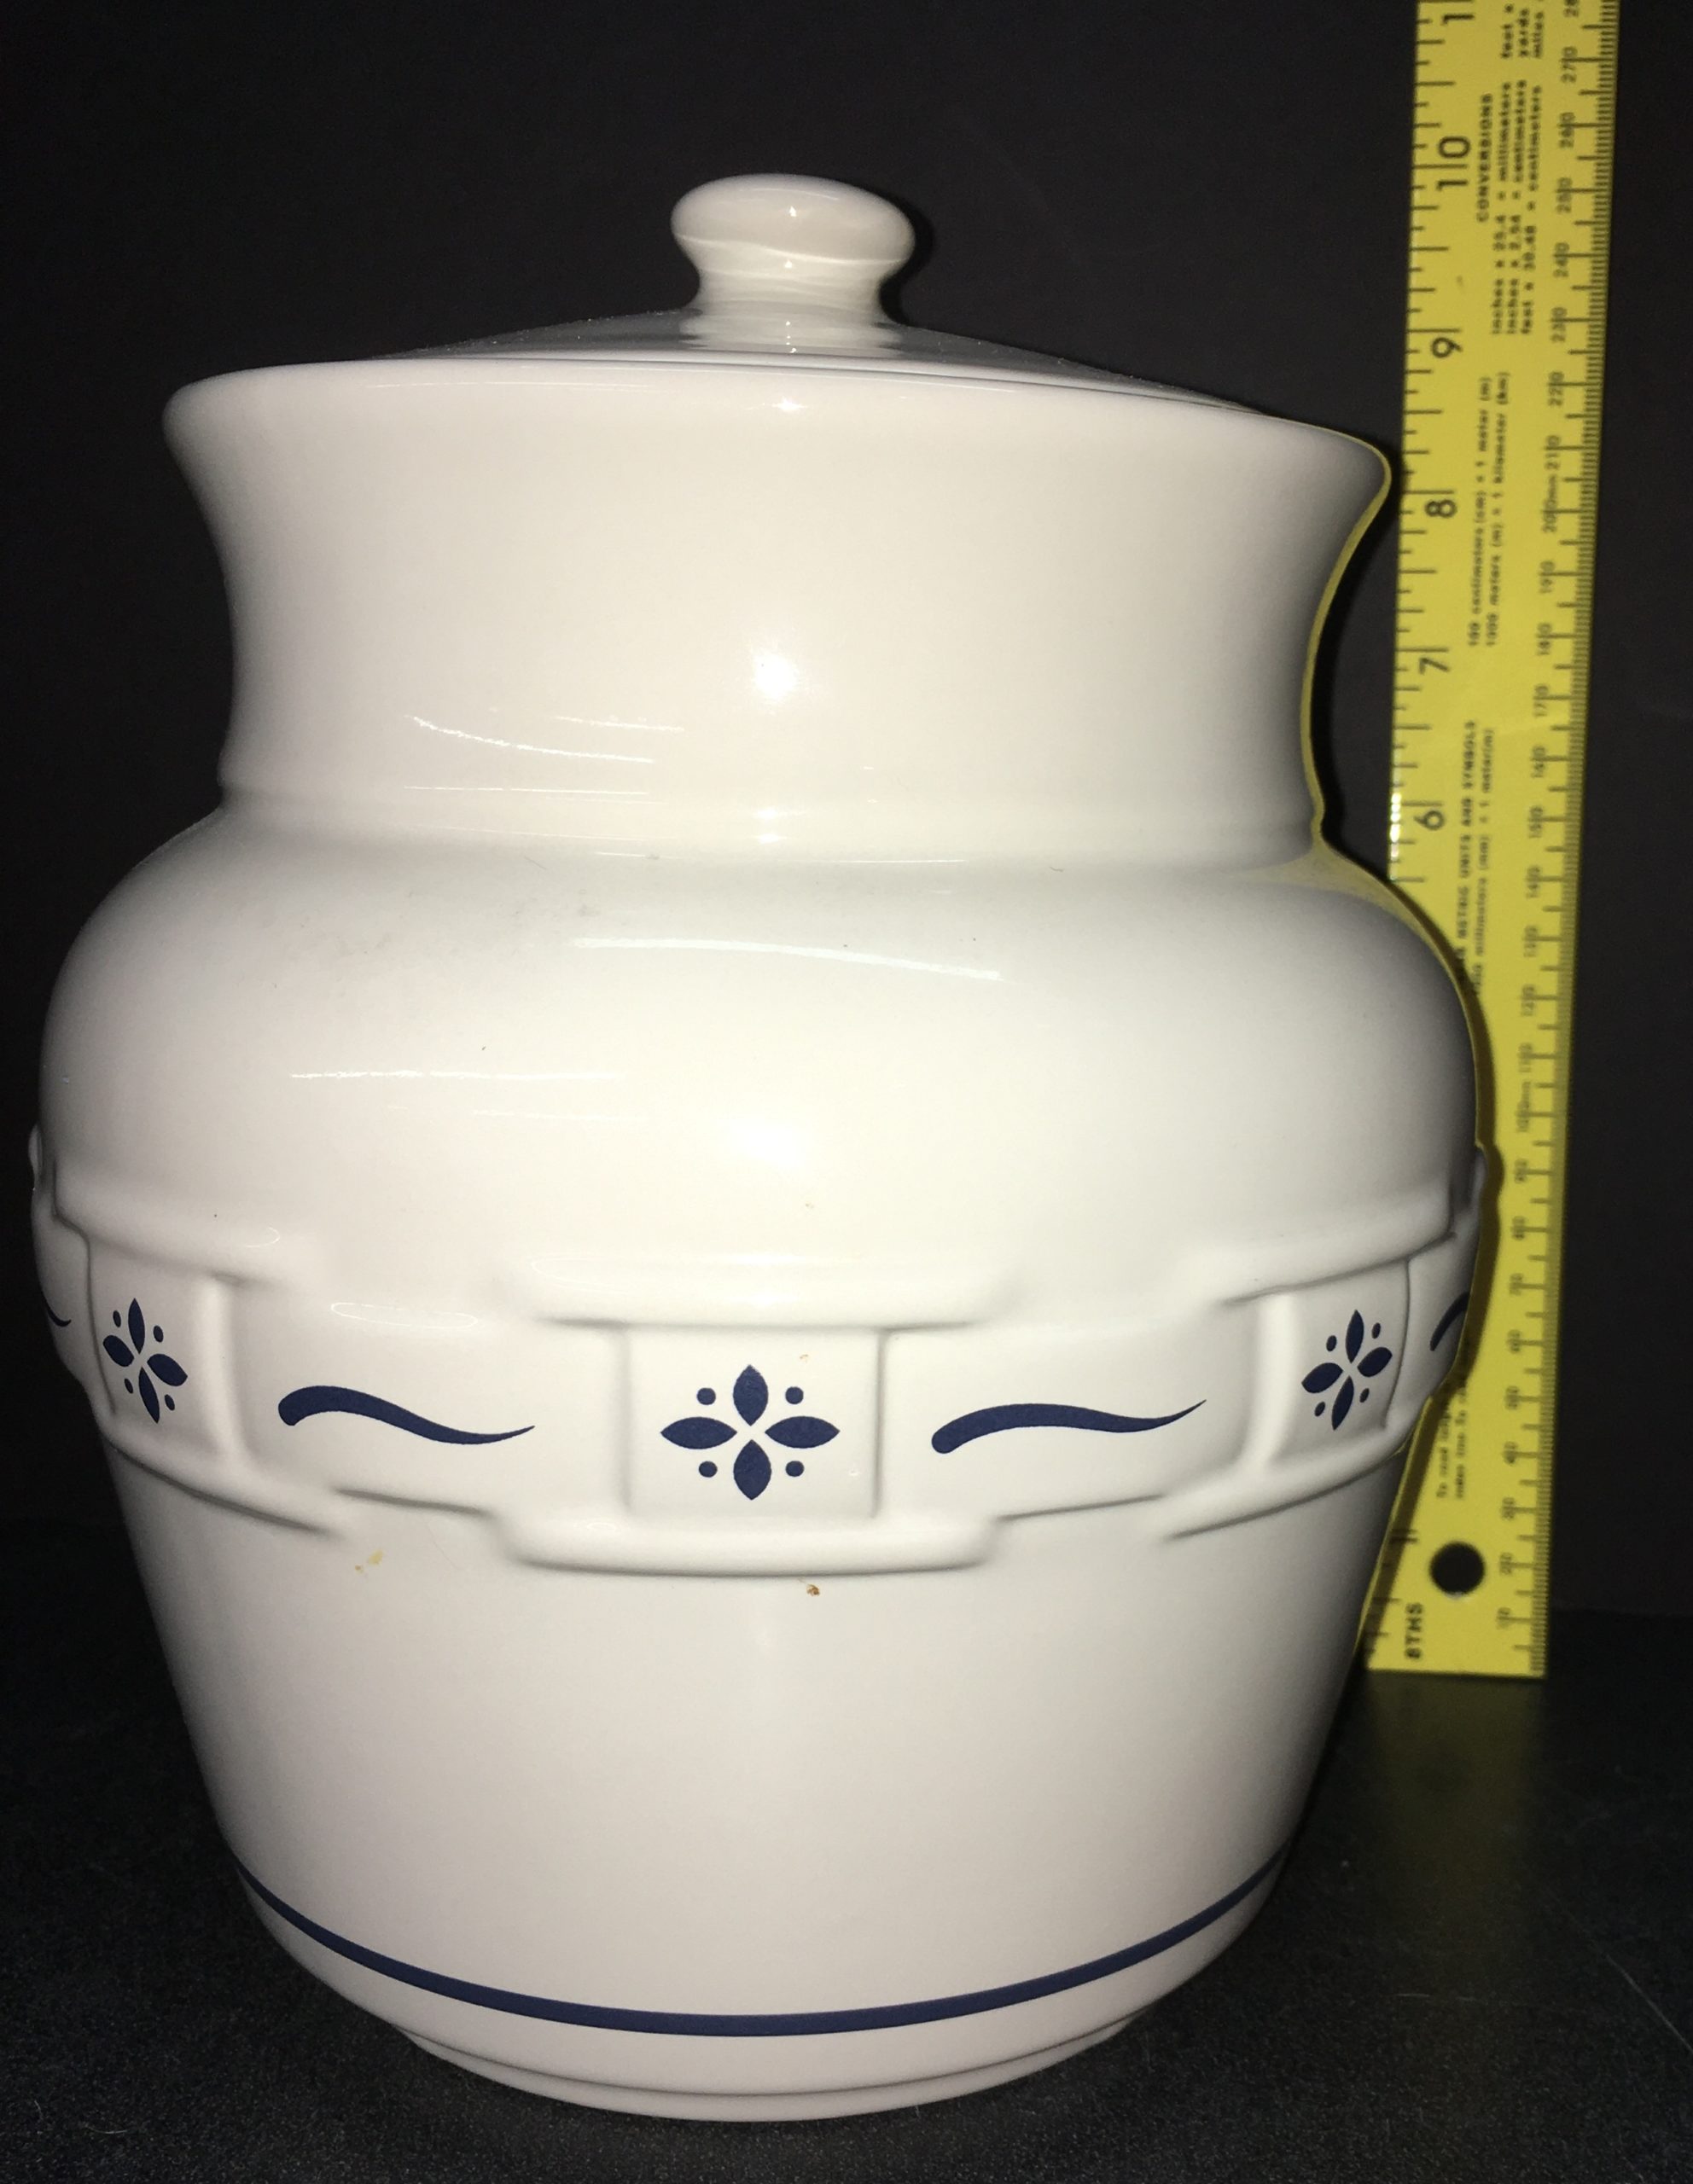 Longaberger Woven Traditions Classic Blue Pottery Medium Canister